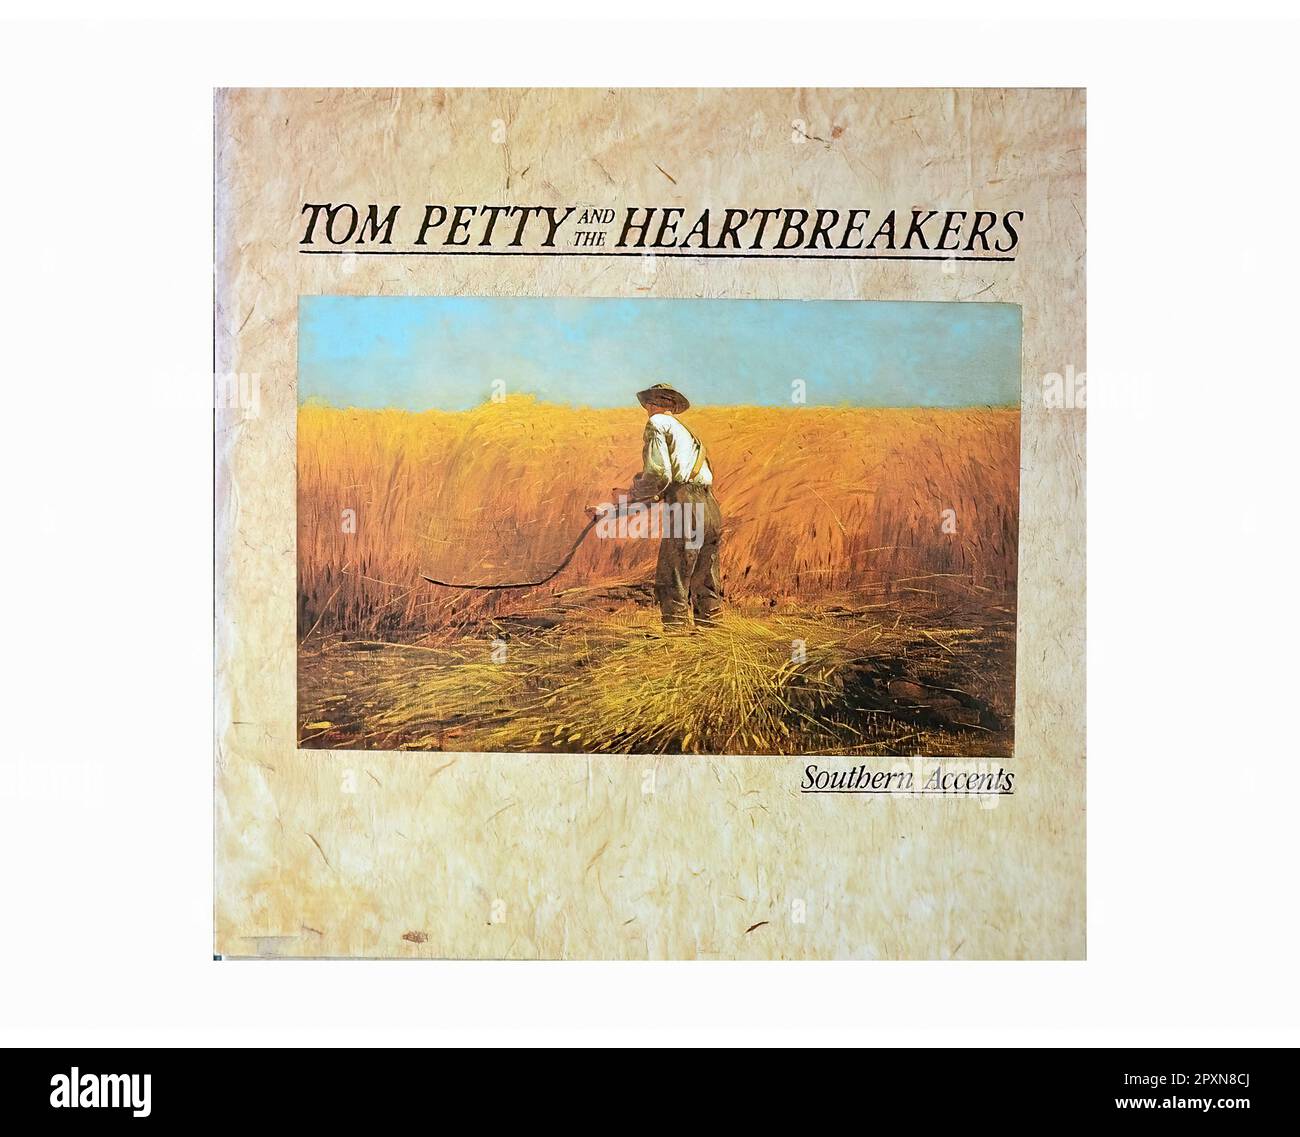 Tom Petty And The Heartbreakers - Southern Accents - Vintage L.P Music Vinyl Record Stock Photo